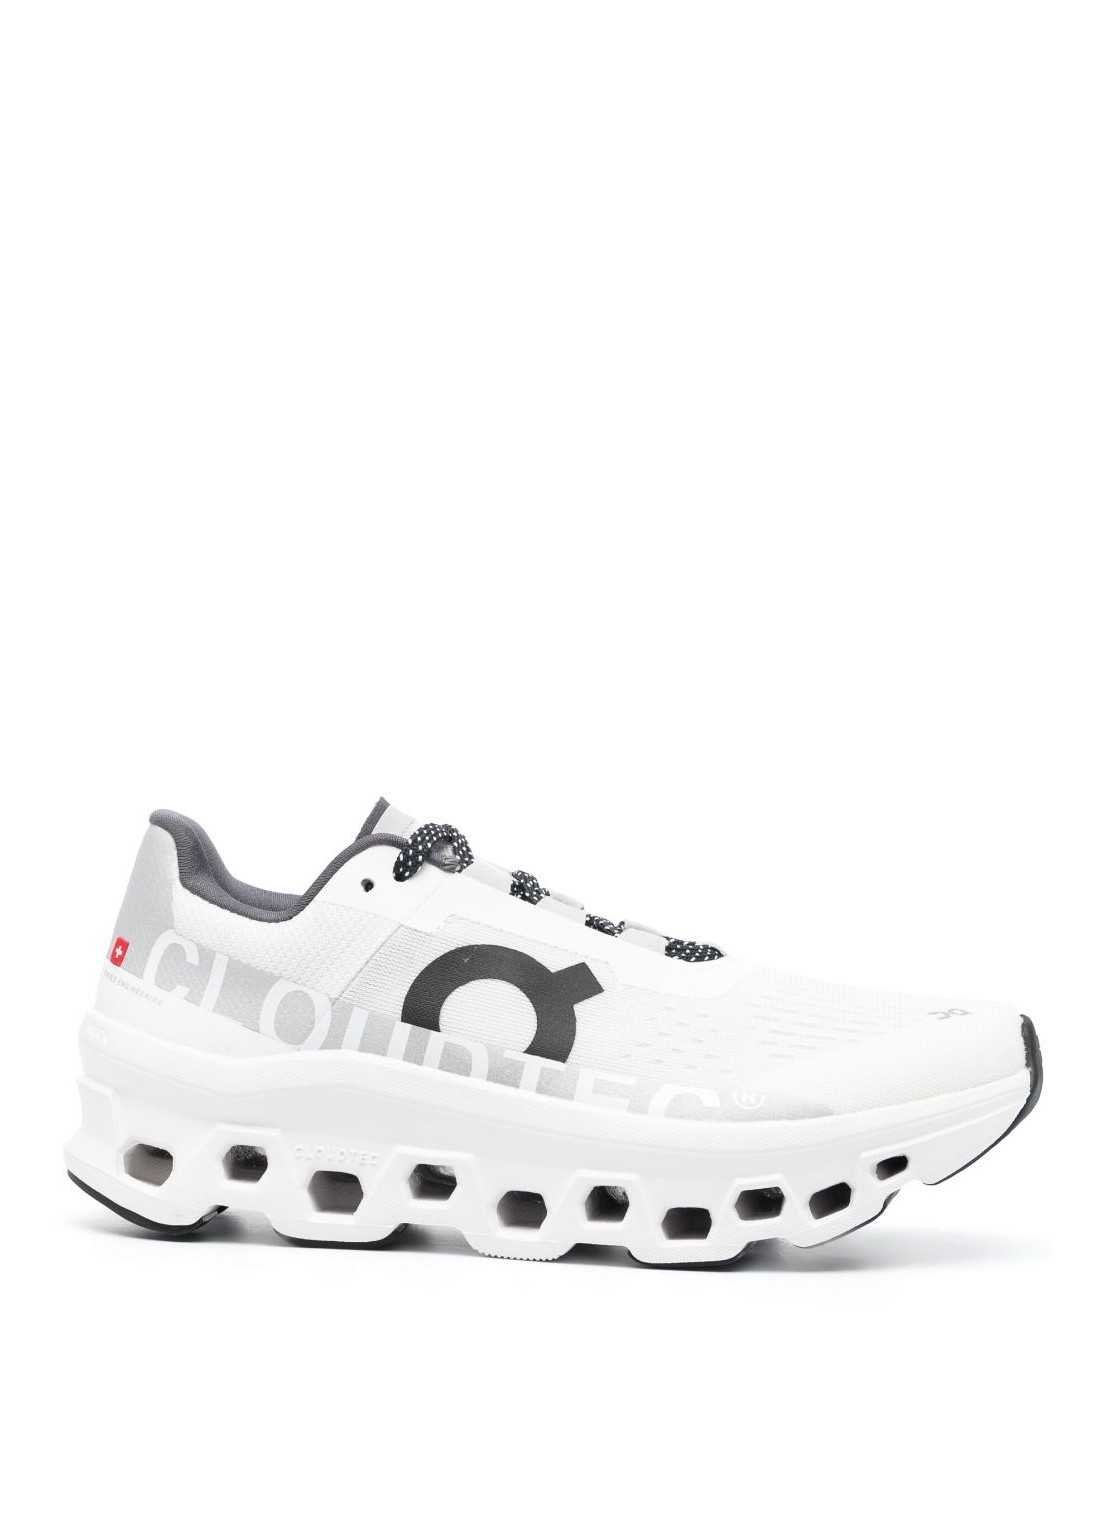 Sneaker on running sneaker woman cloudmonster exclusive 6198285 undyed white white talla blanco
 